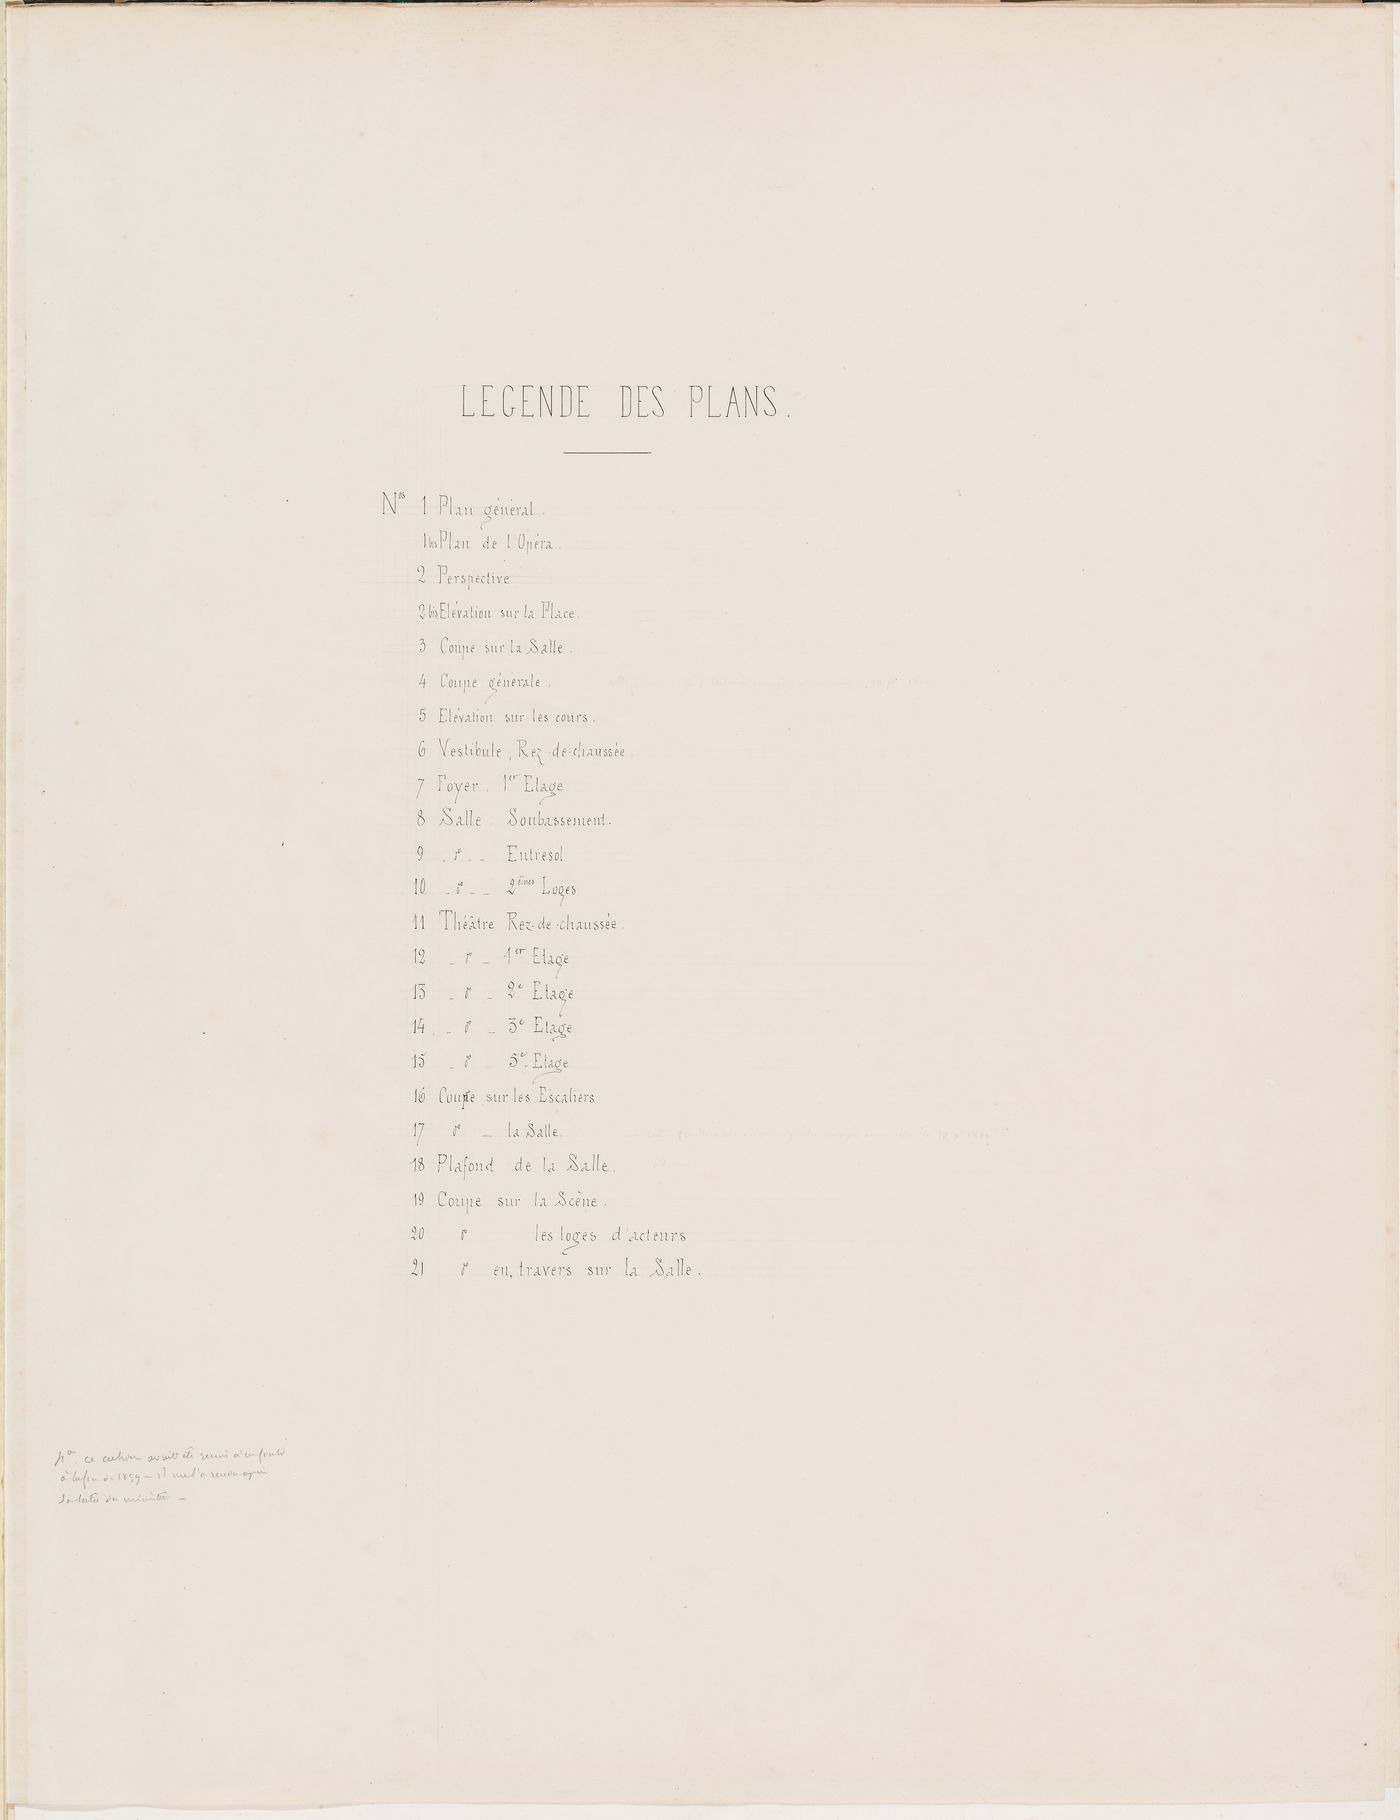 Project for an opera house for the Théâtre impérial de l'opéra: Table of contents